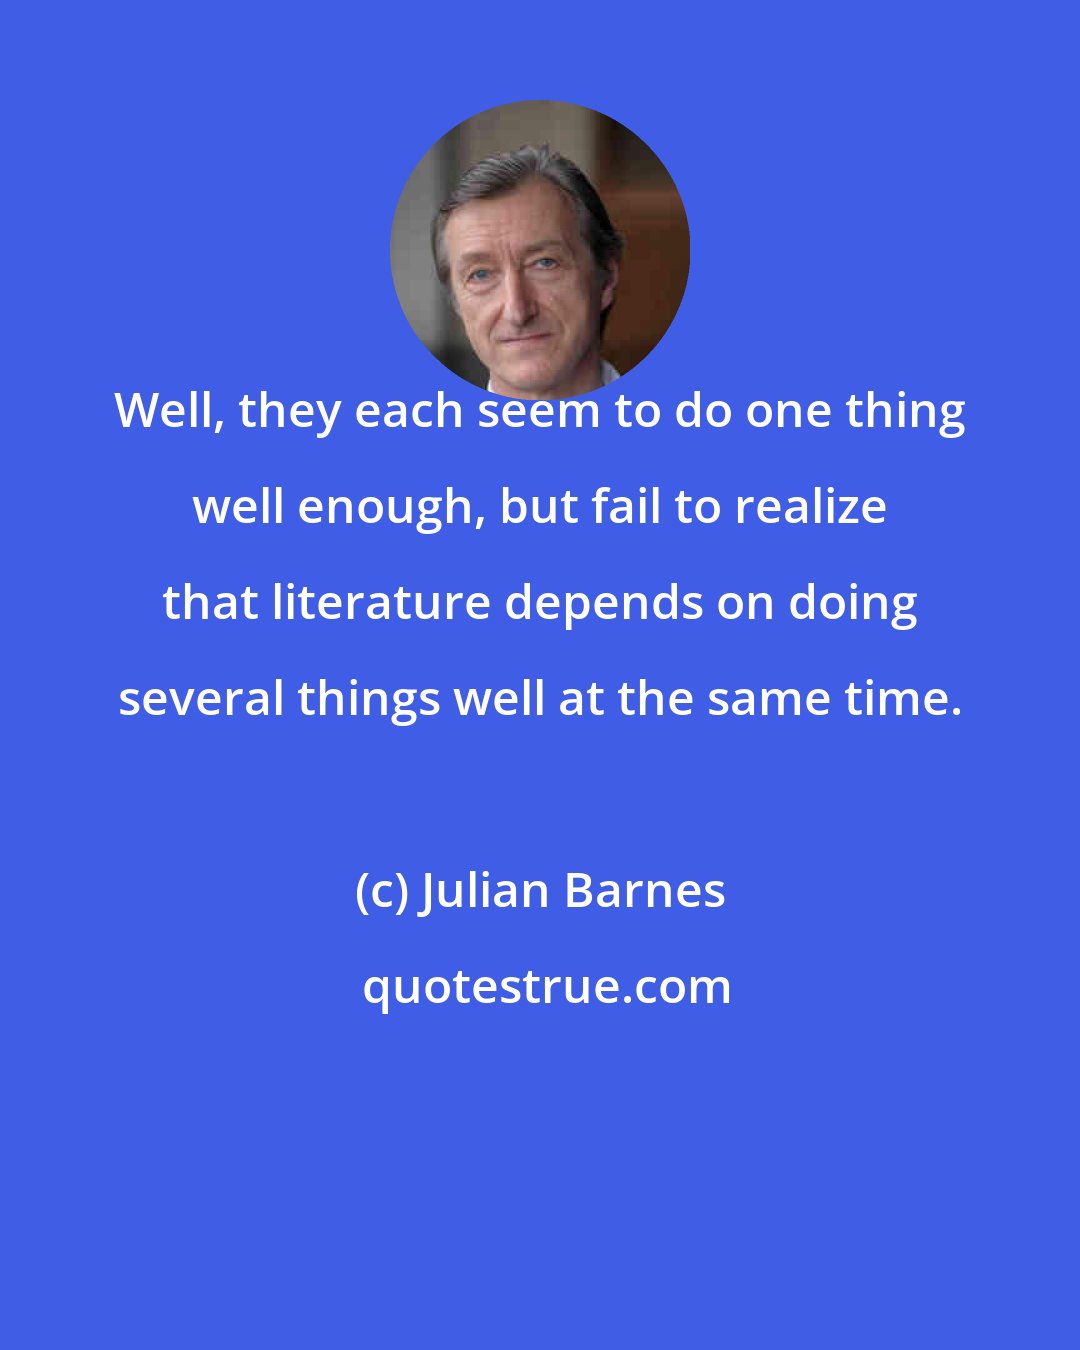 Julian Barnes: Well, they each seem to do one thing well enough, but fail to realize that literature depends on doing several things well at the same time.